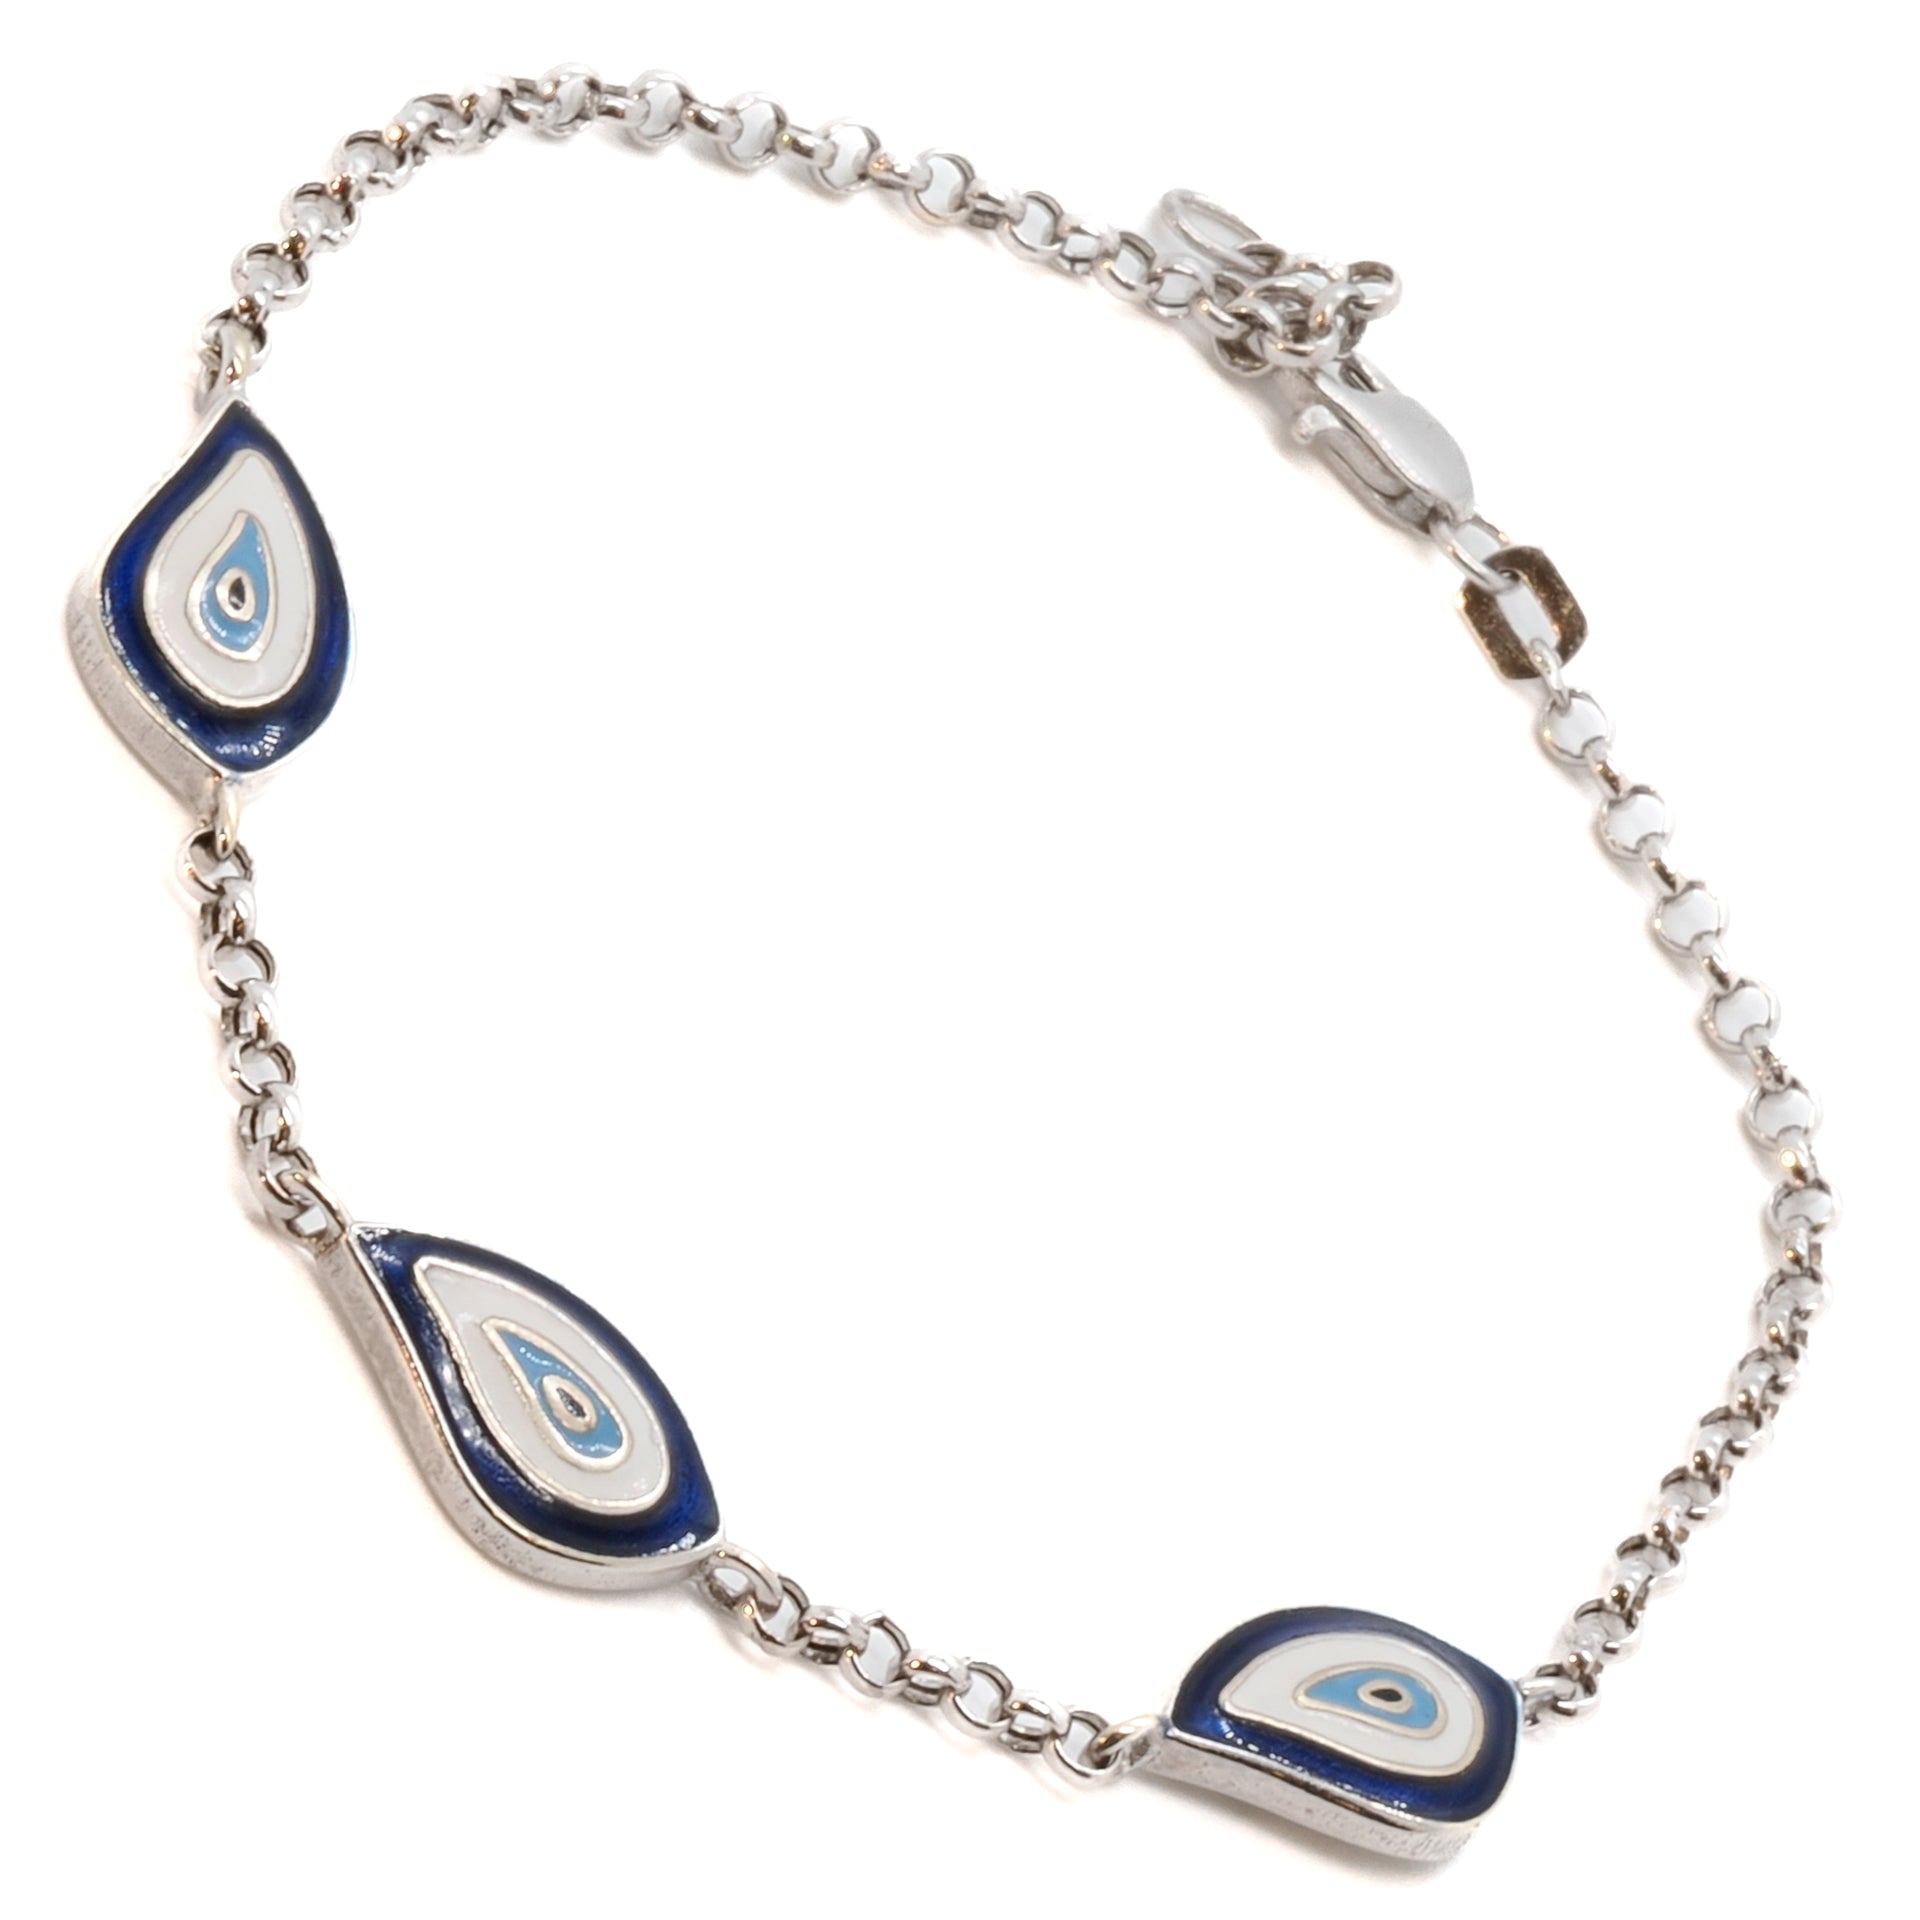 Ebru Jewelry Luxury Series - Unique Teardrop Evil Eye design for a special touch.